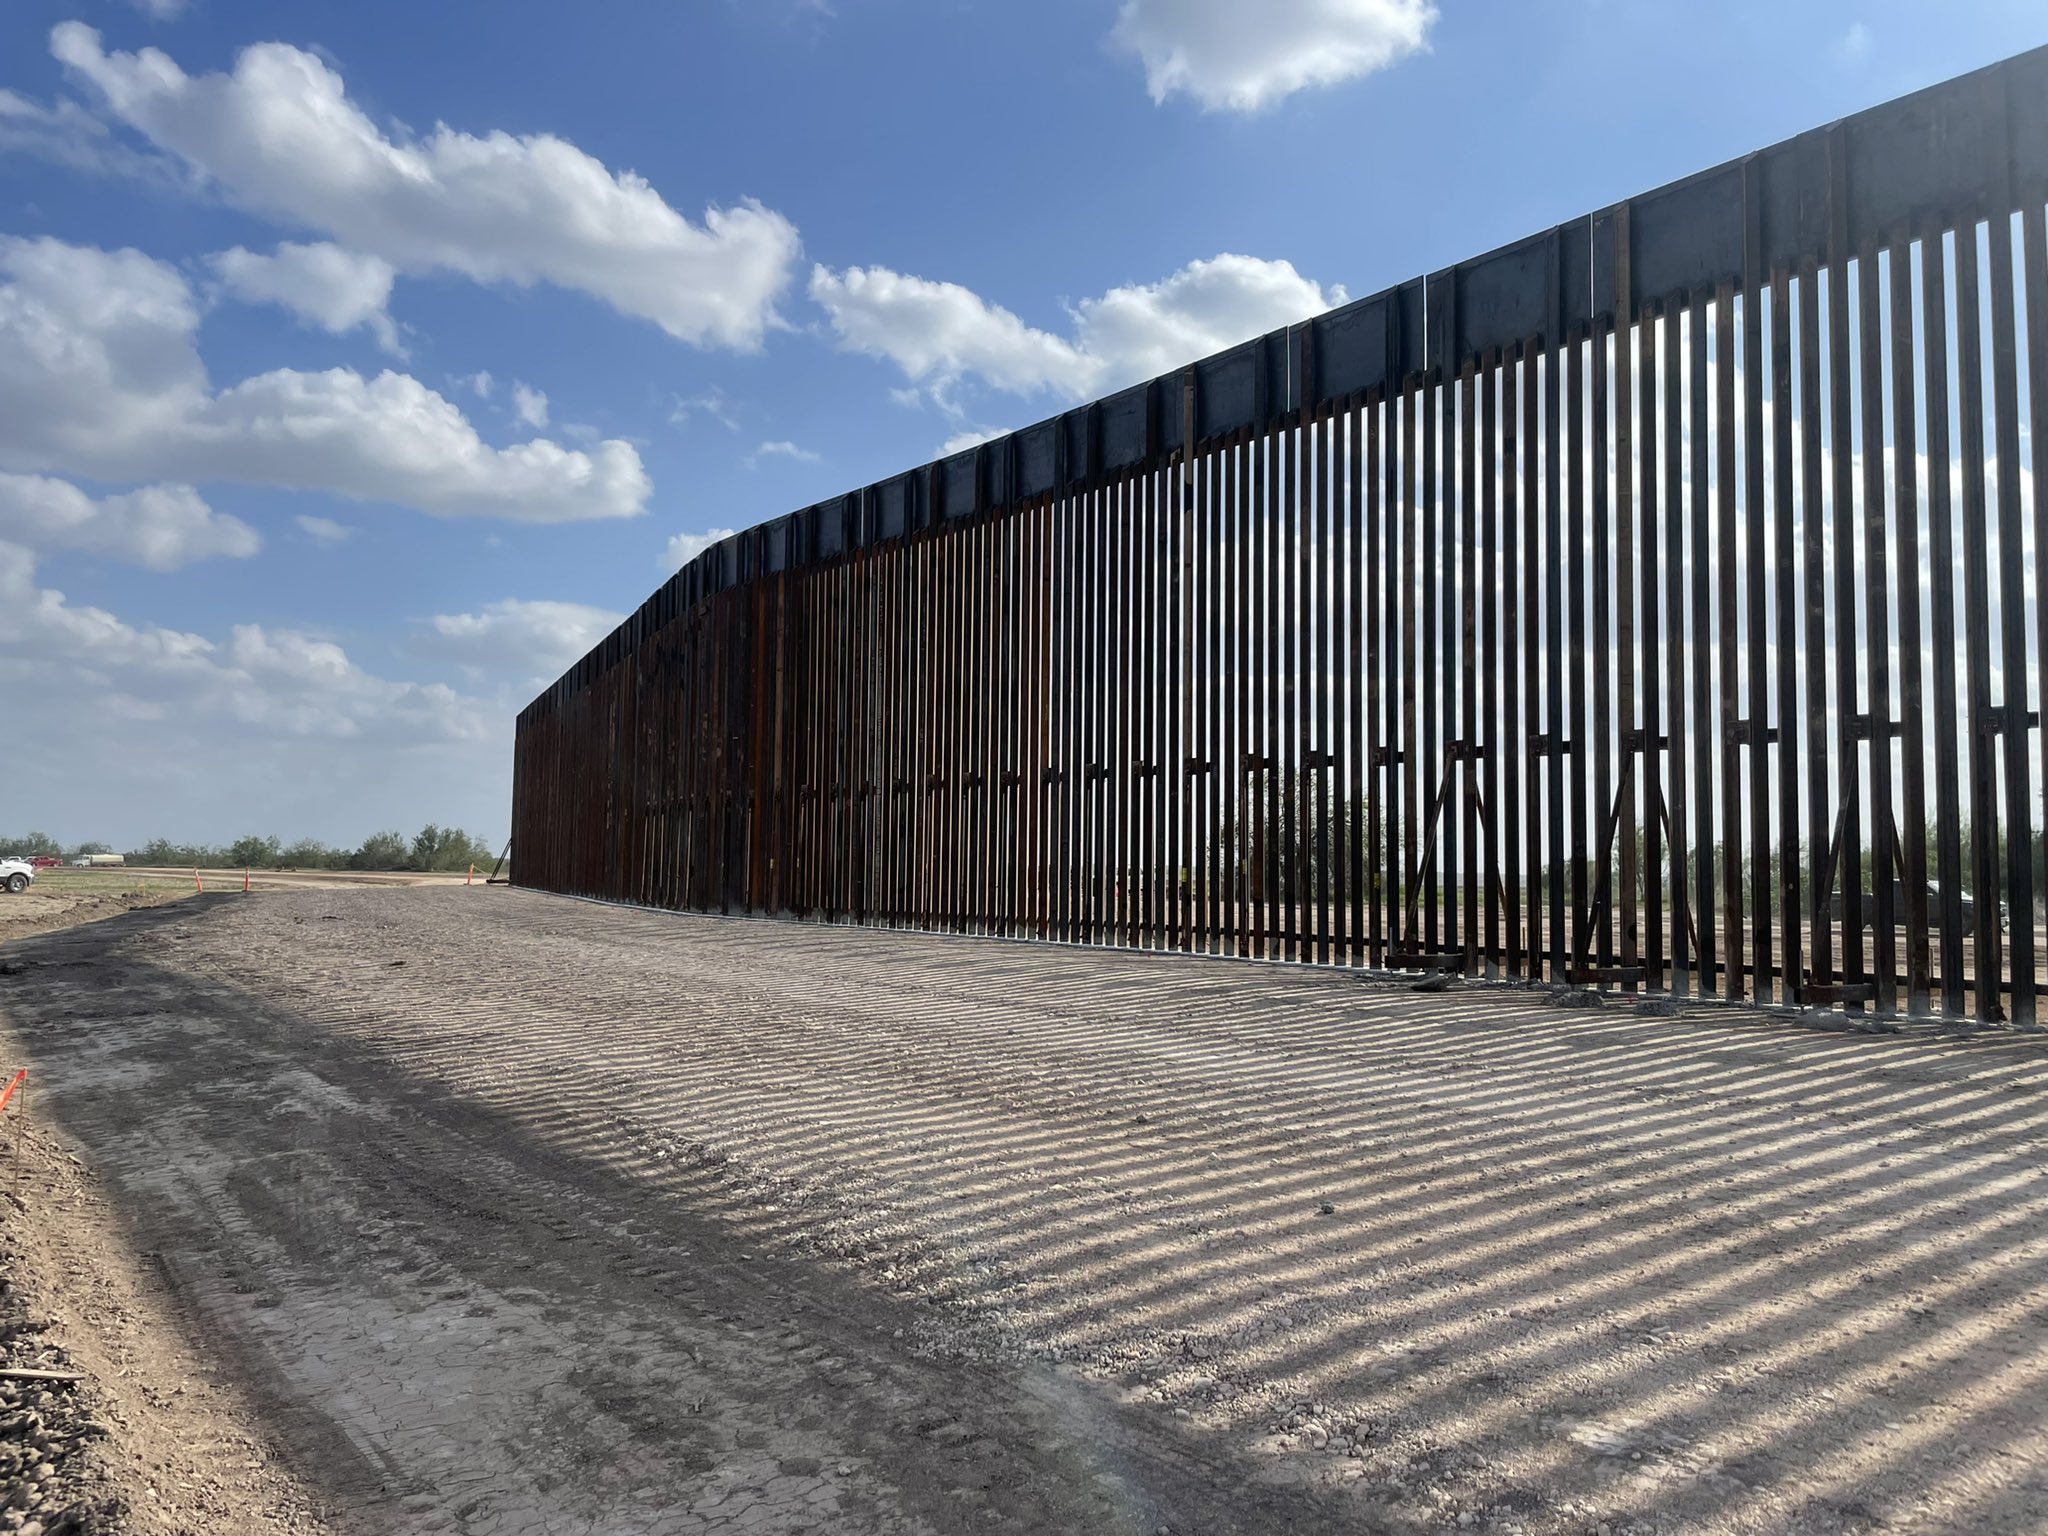  Texas Begins Building Border Wall — But Feds Won’t Sell Leftover Panels To Texas, Leaves Them Sitting Around